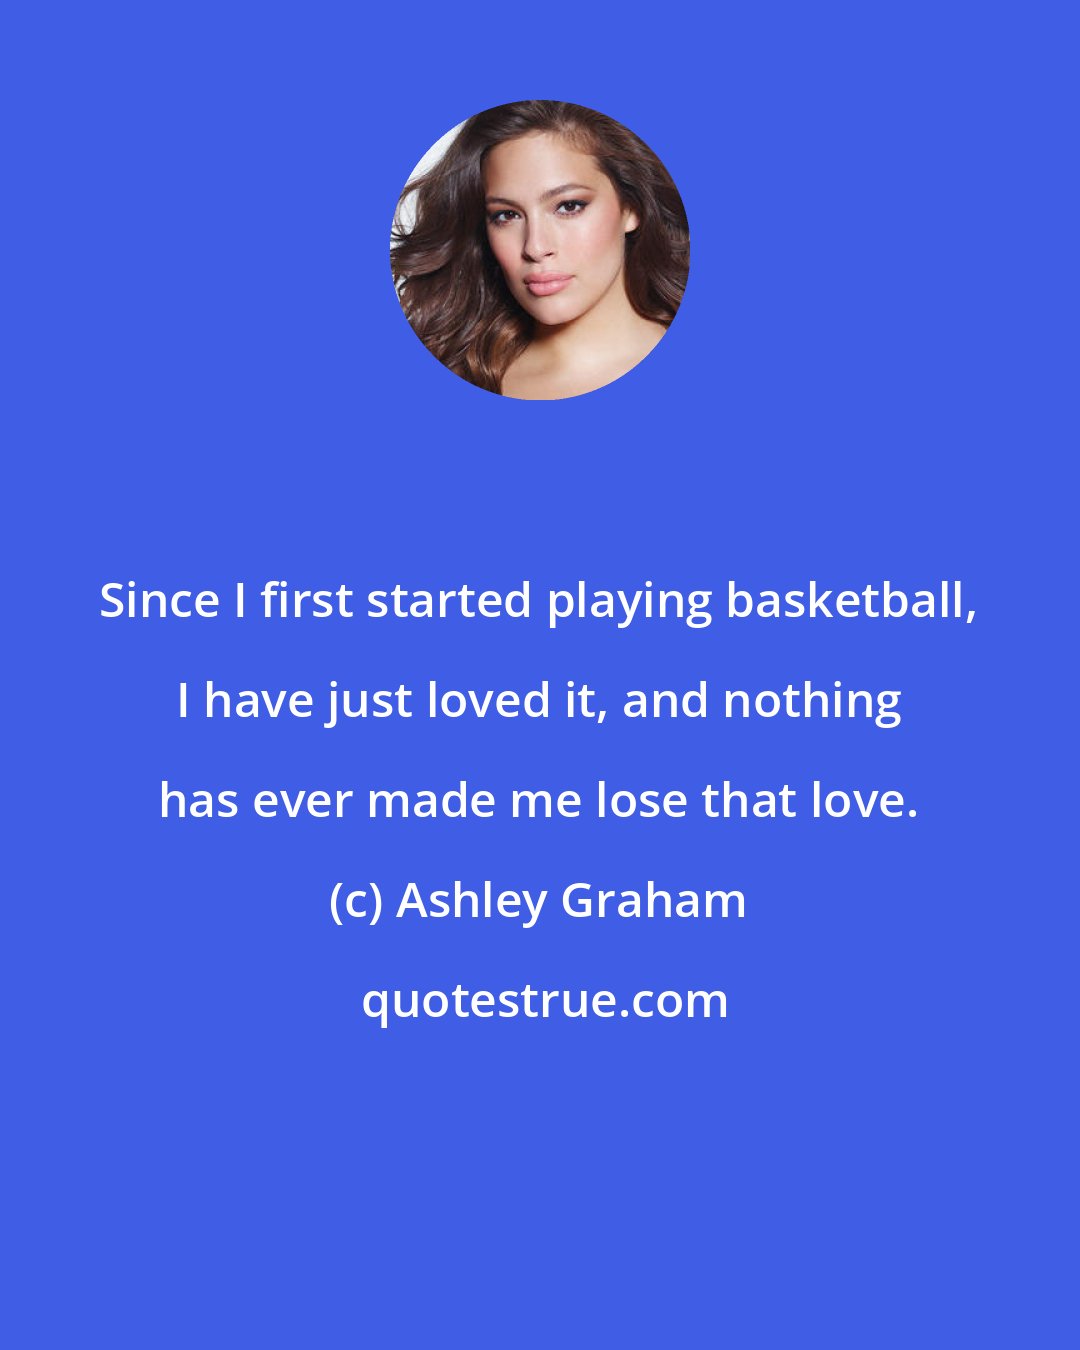 Ashley Graham: Since I first started playing basketball, I have just loved it, and nothing has ever made me lose that love.